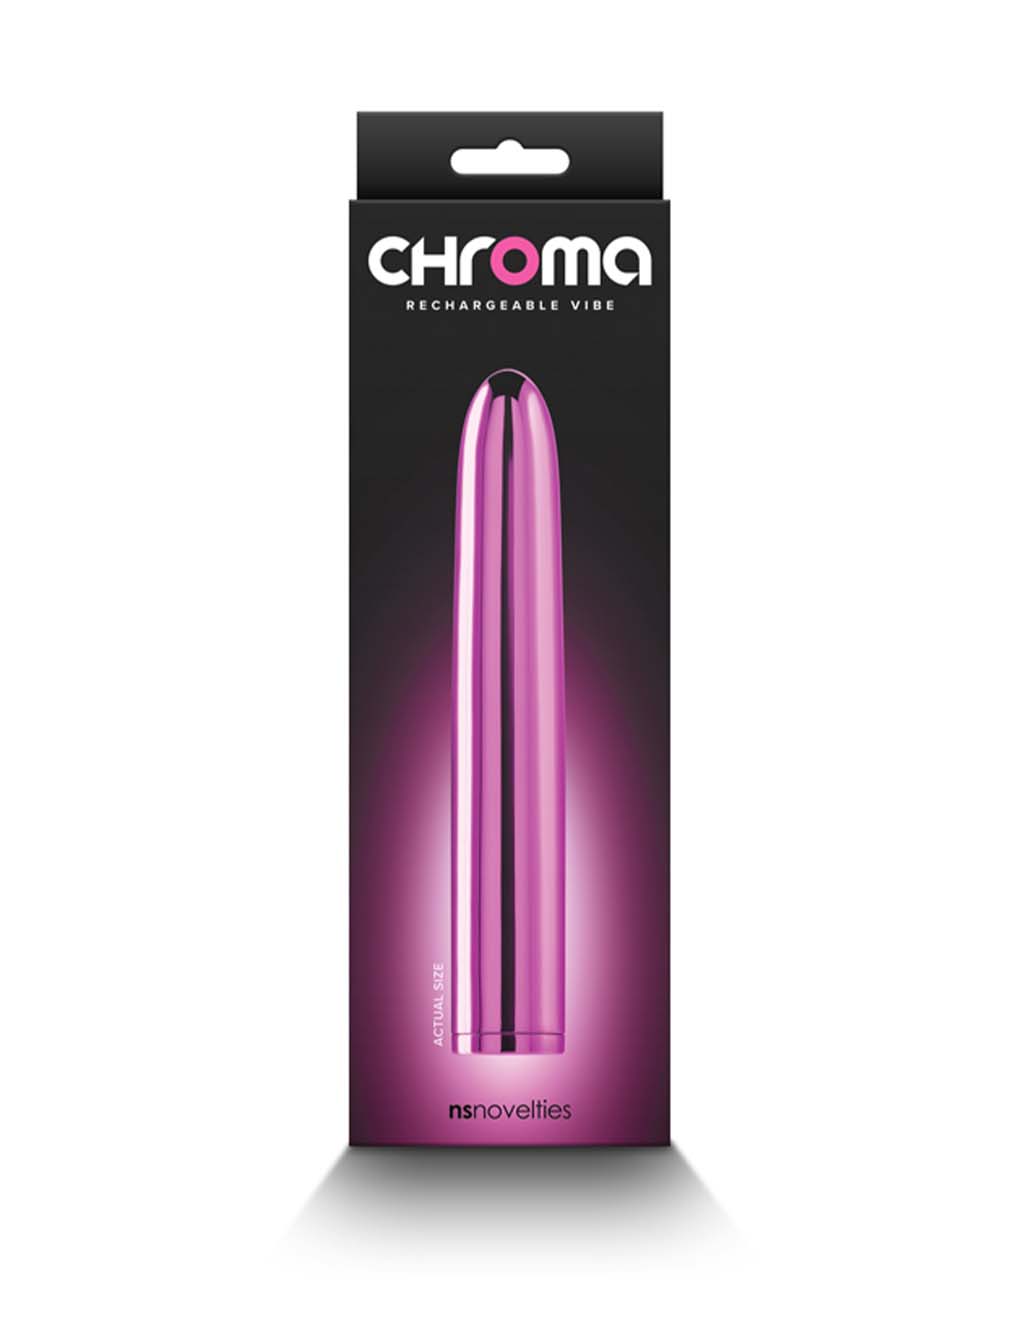 Chroma Standard Vibe Rechargeable- Box